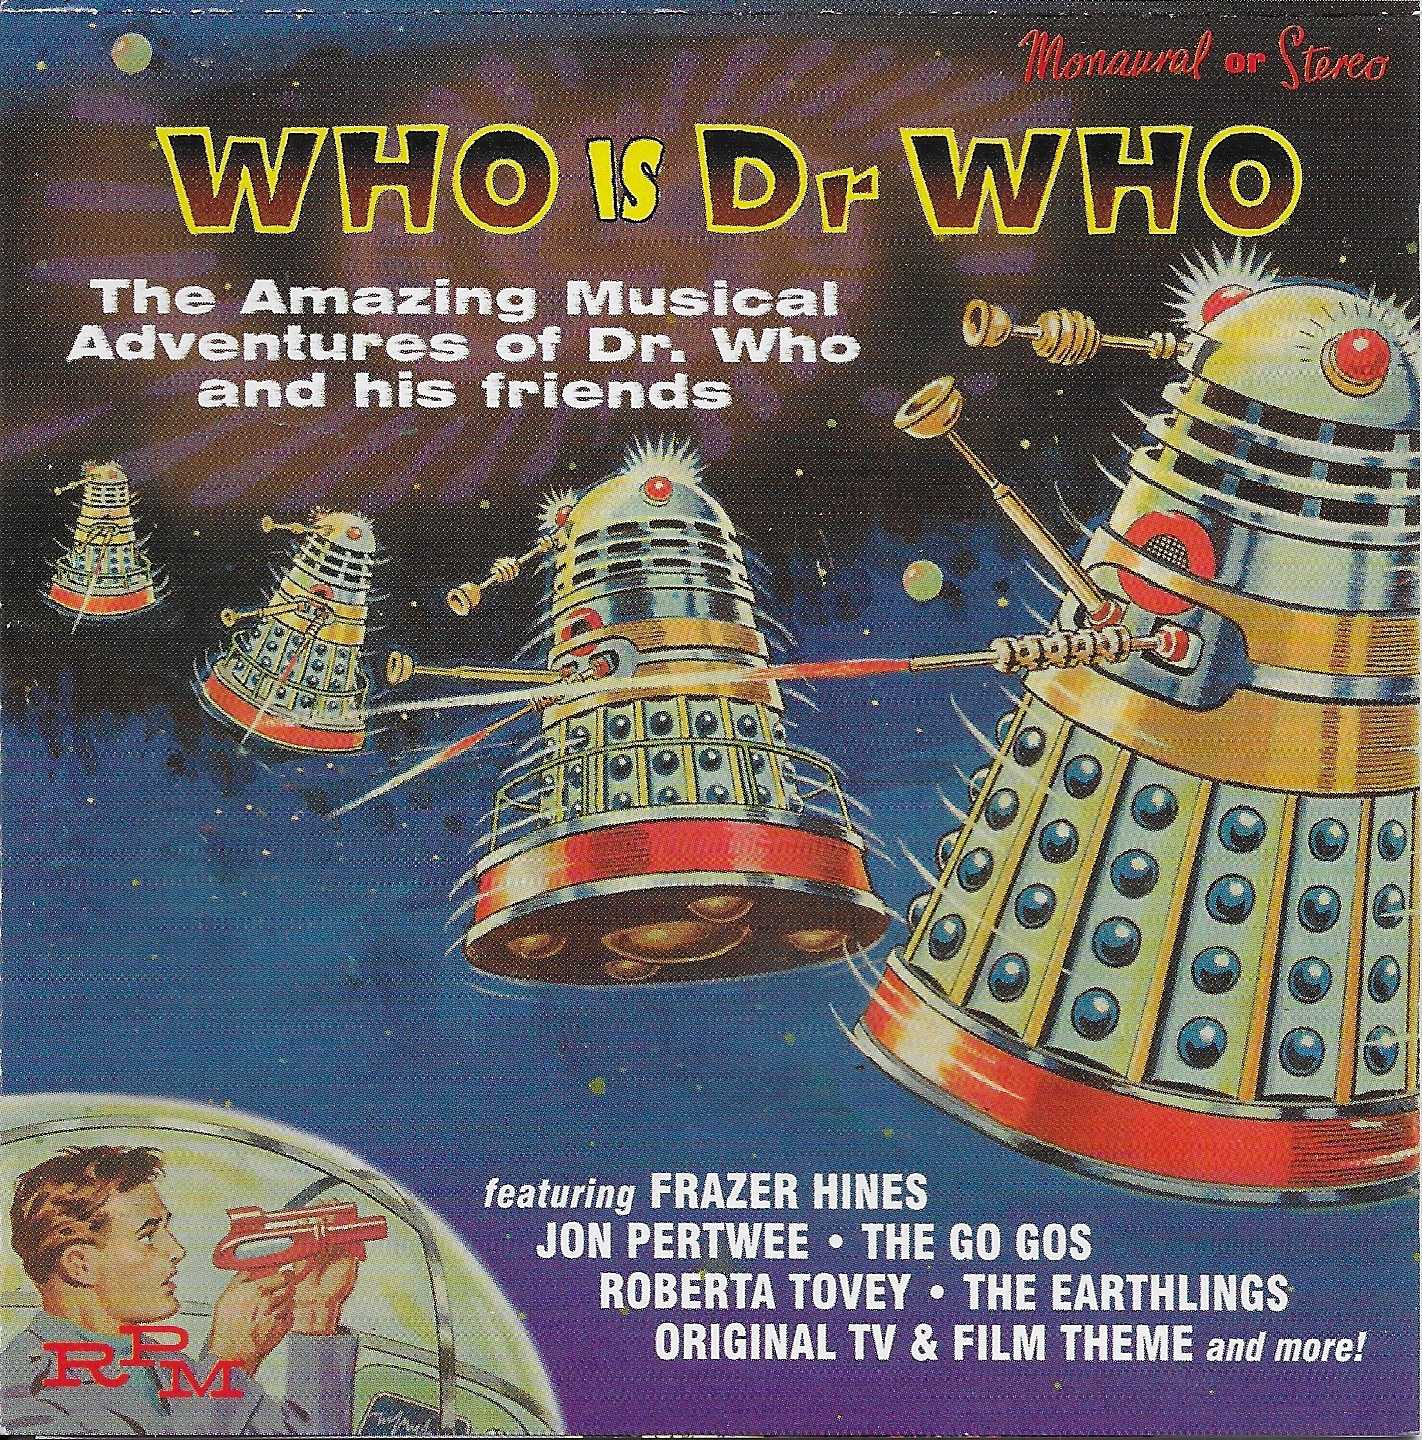 Picture of Who is Doctor Who ? by artist Various from the BBC cds - Records and Tapes library